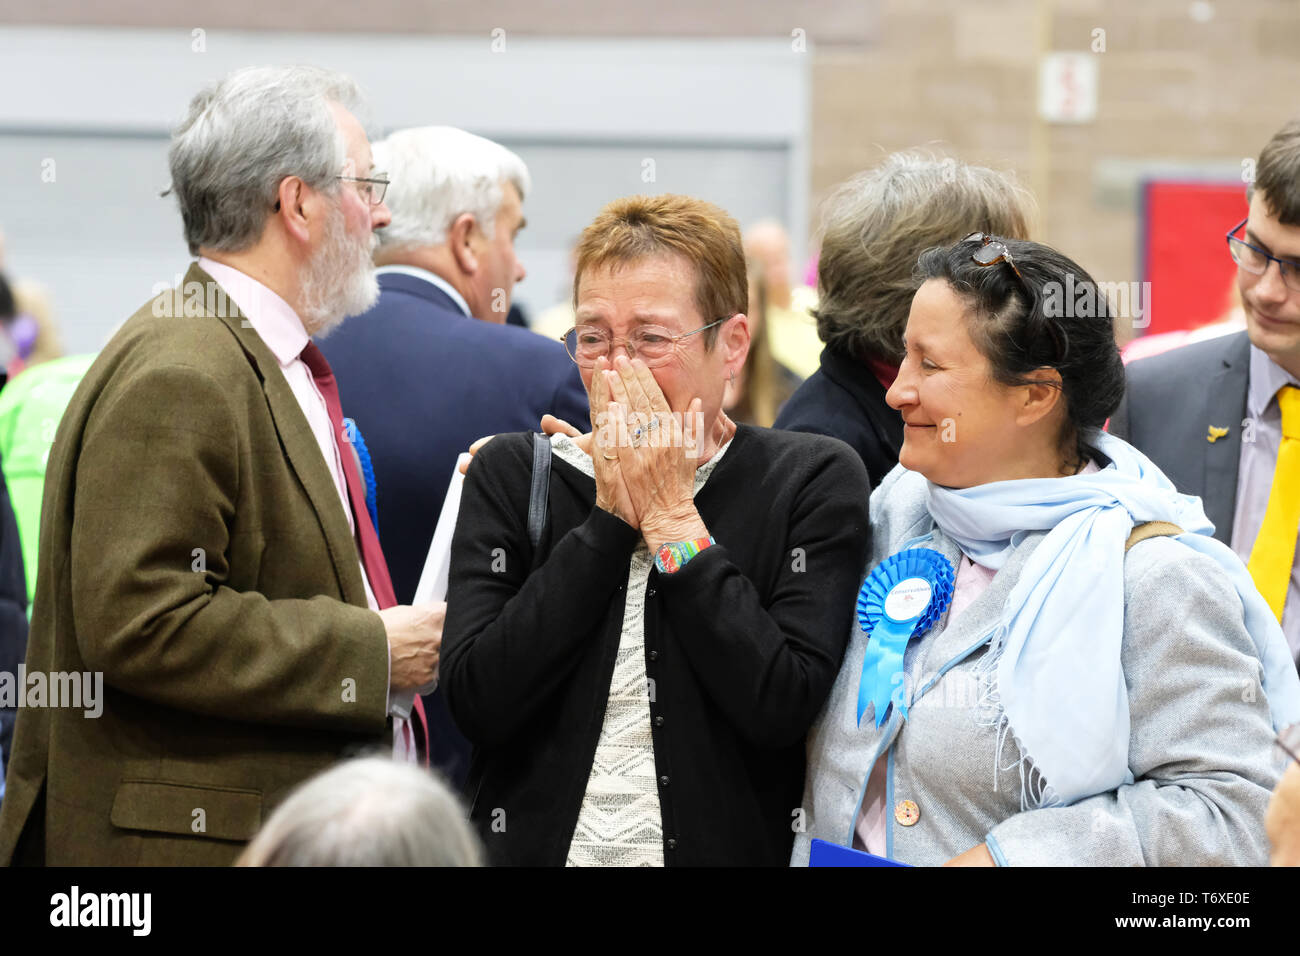 Hereford, Herefordshire, England, UK - Friday 3rd May 2019 - A Conservative candidate reacts as results start to come in - Counting started at 9.30am on Friday morning after local elections took place in Herefordshire yesterday for both Herefordshire Council and the City Council. Polls took place for 248 English councils, six mayors and all 11 councils in Northern Ireland.  Credit: Steven May/Alamy Live News Stock Photo